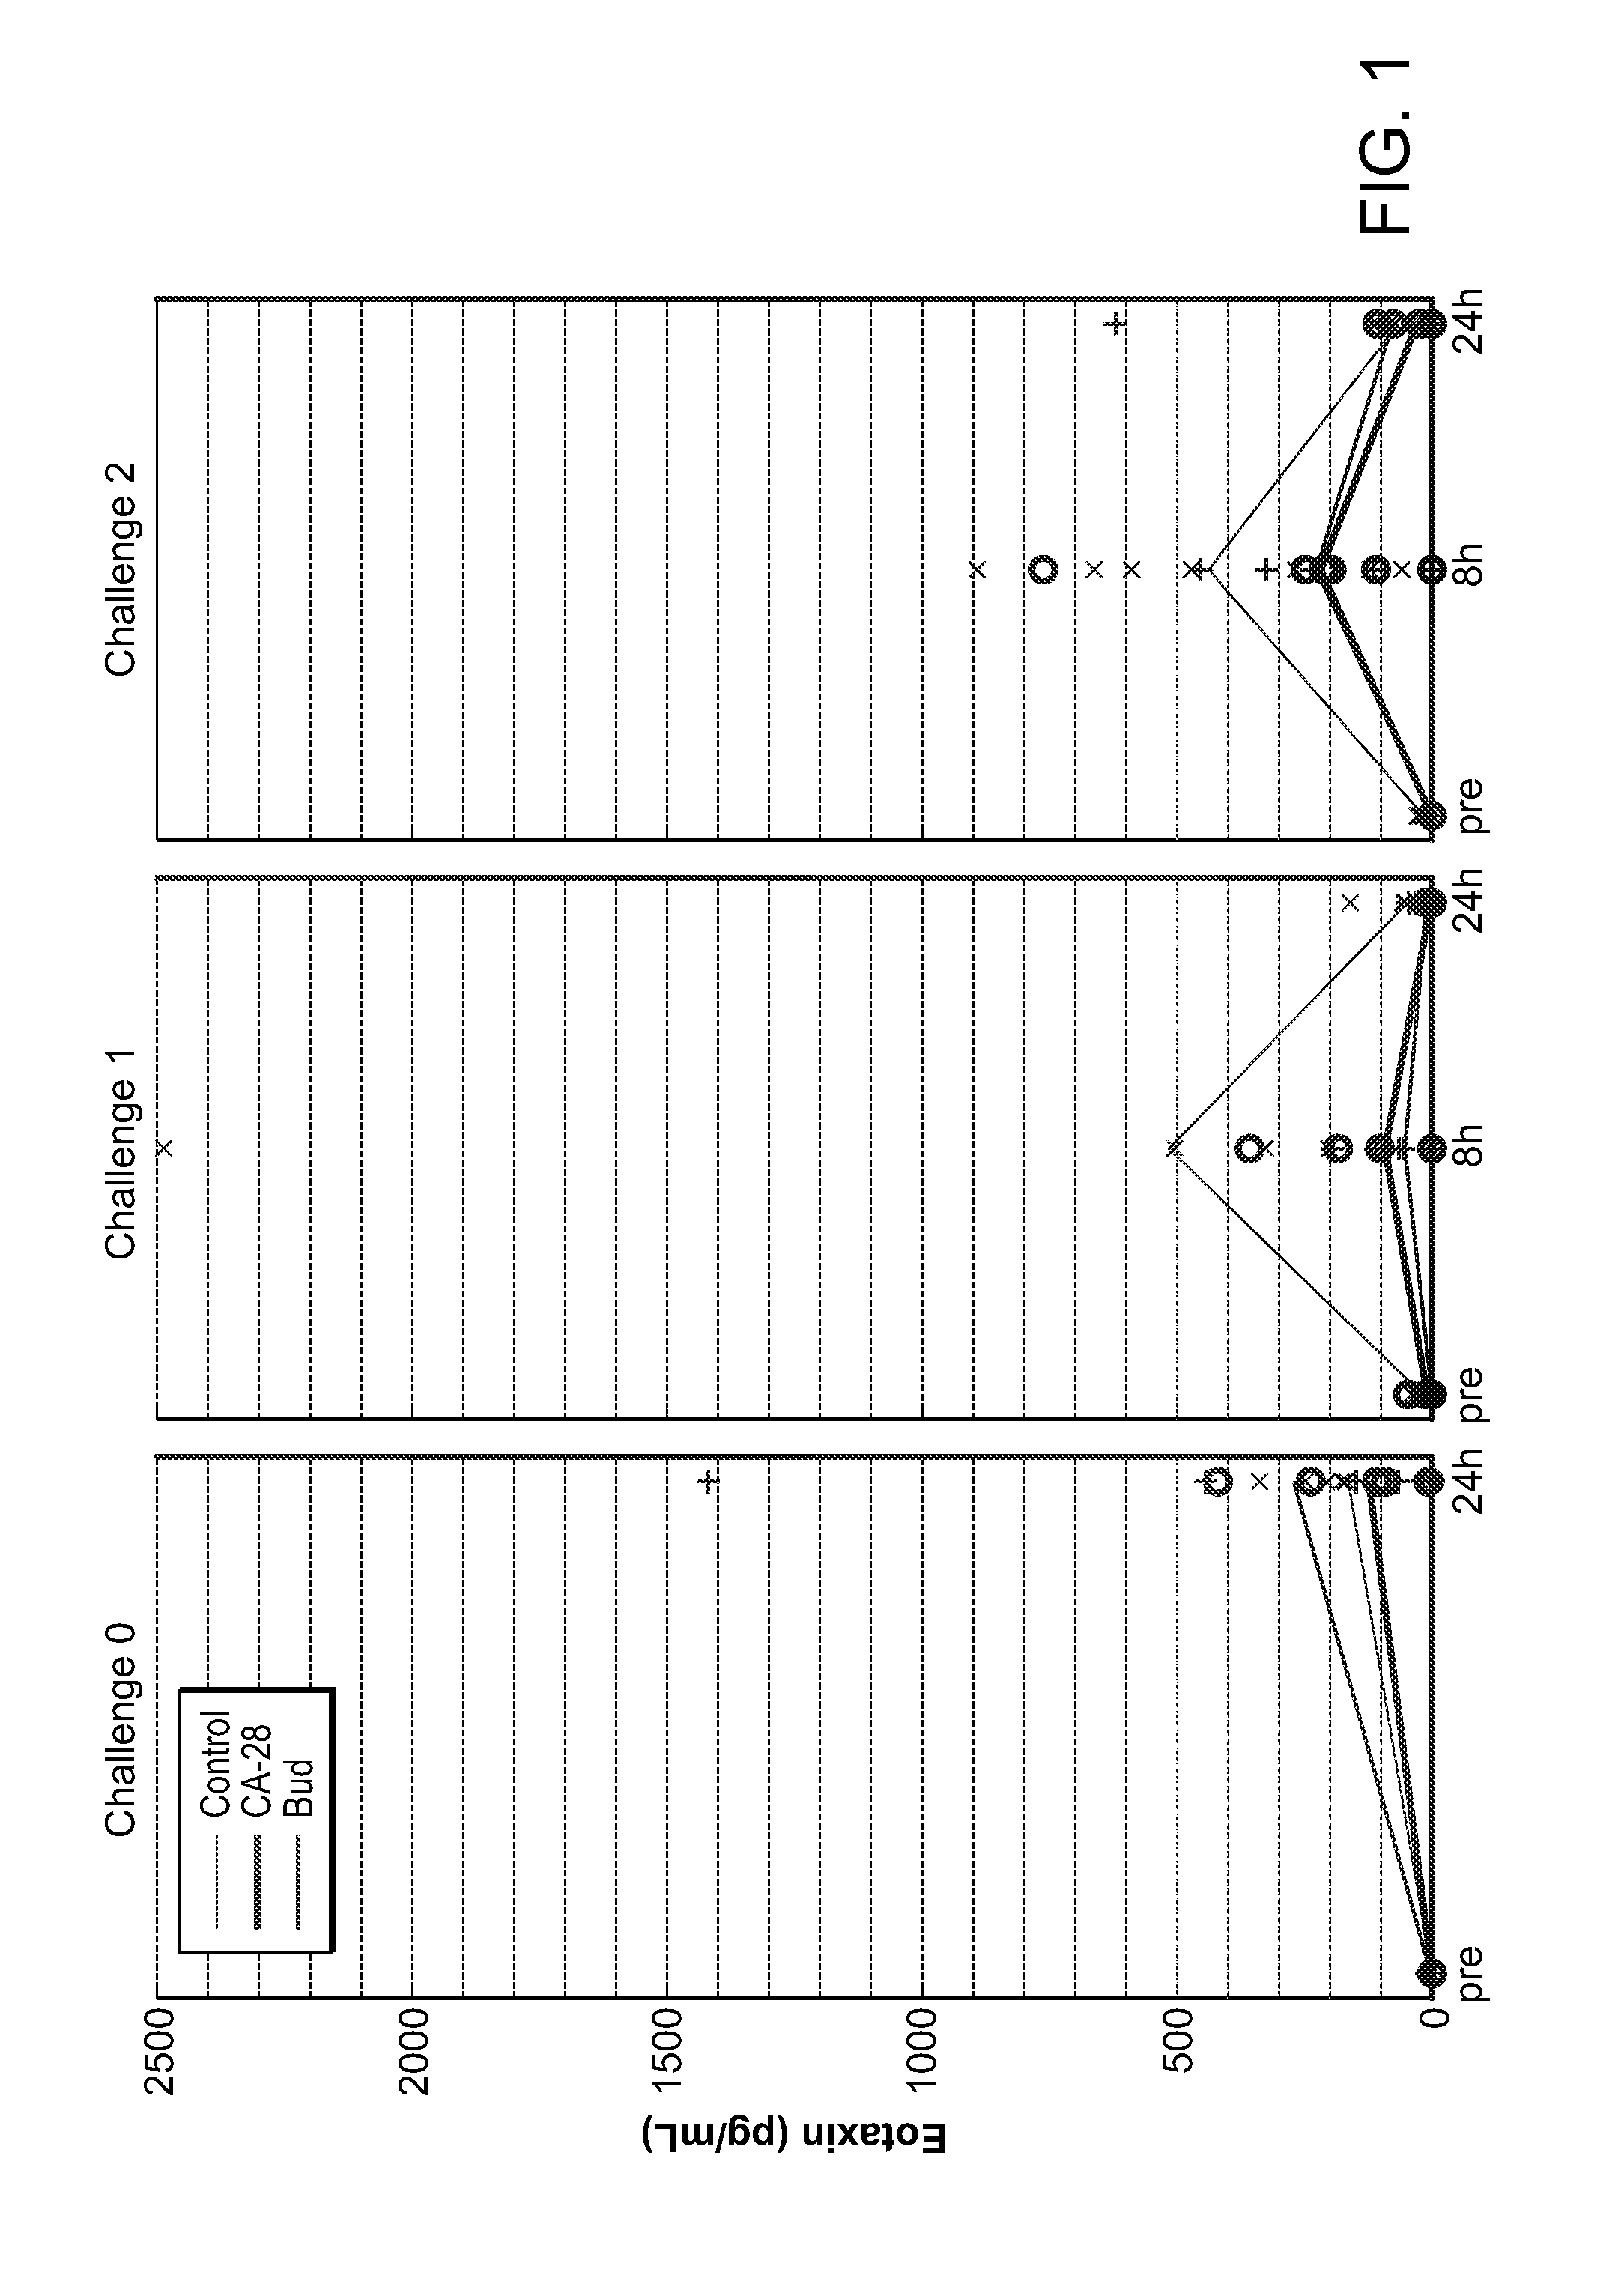 Methods of treating chronic disorders with complement inhibitors